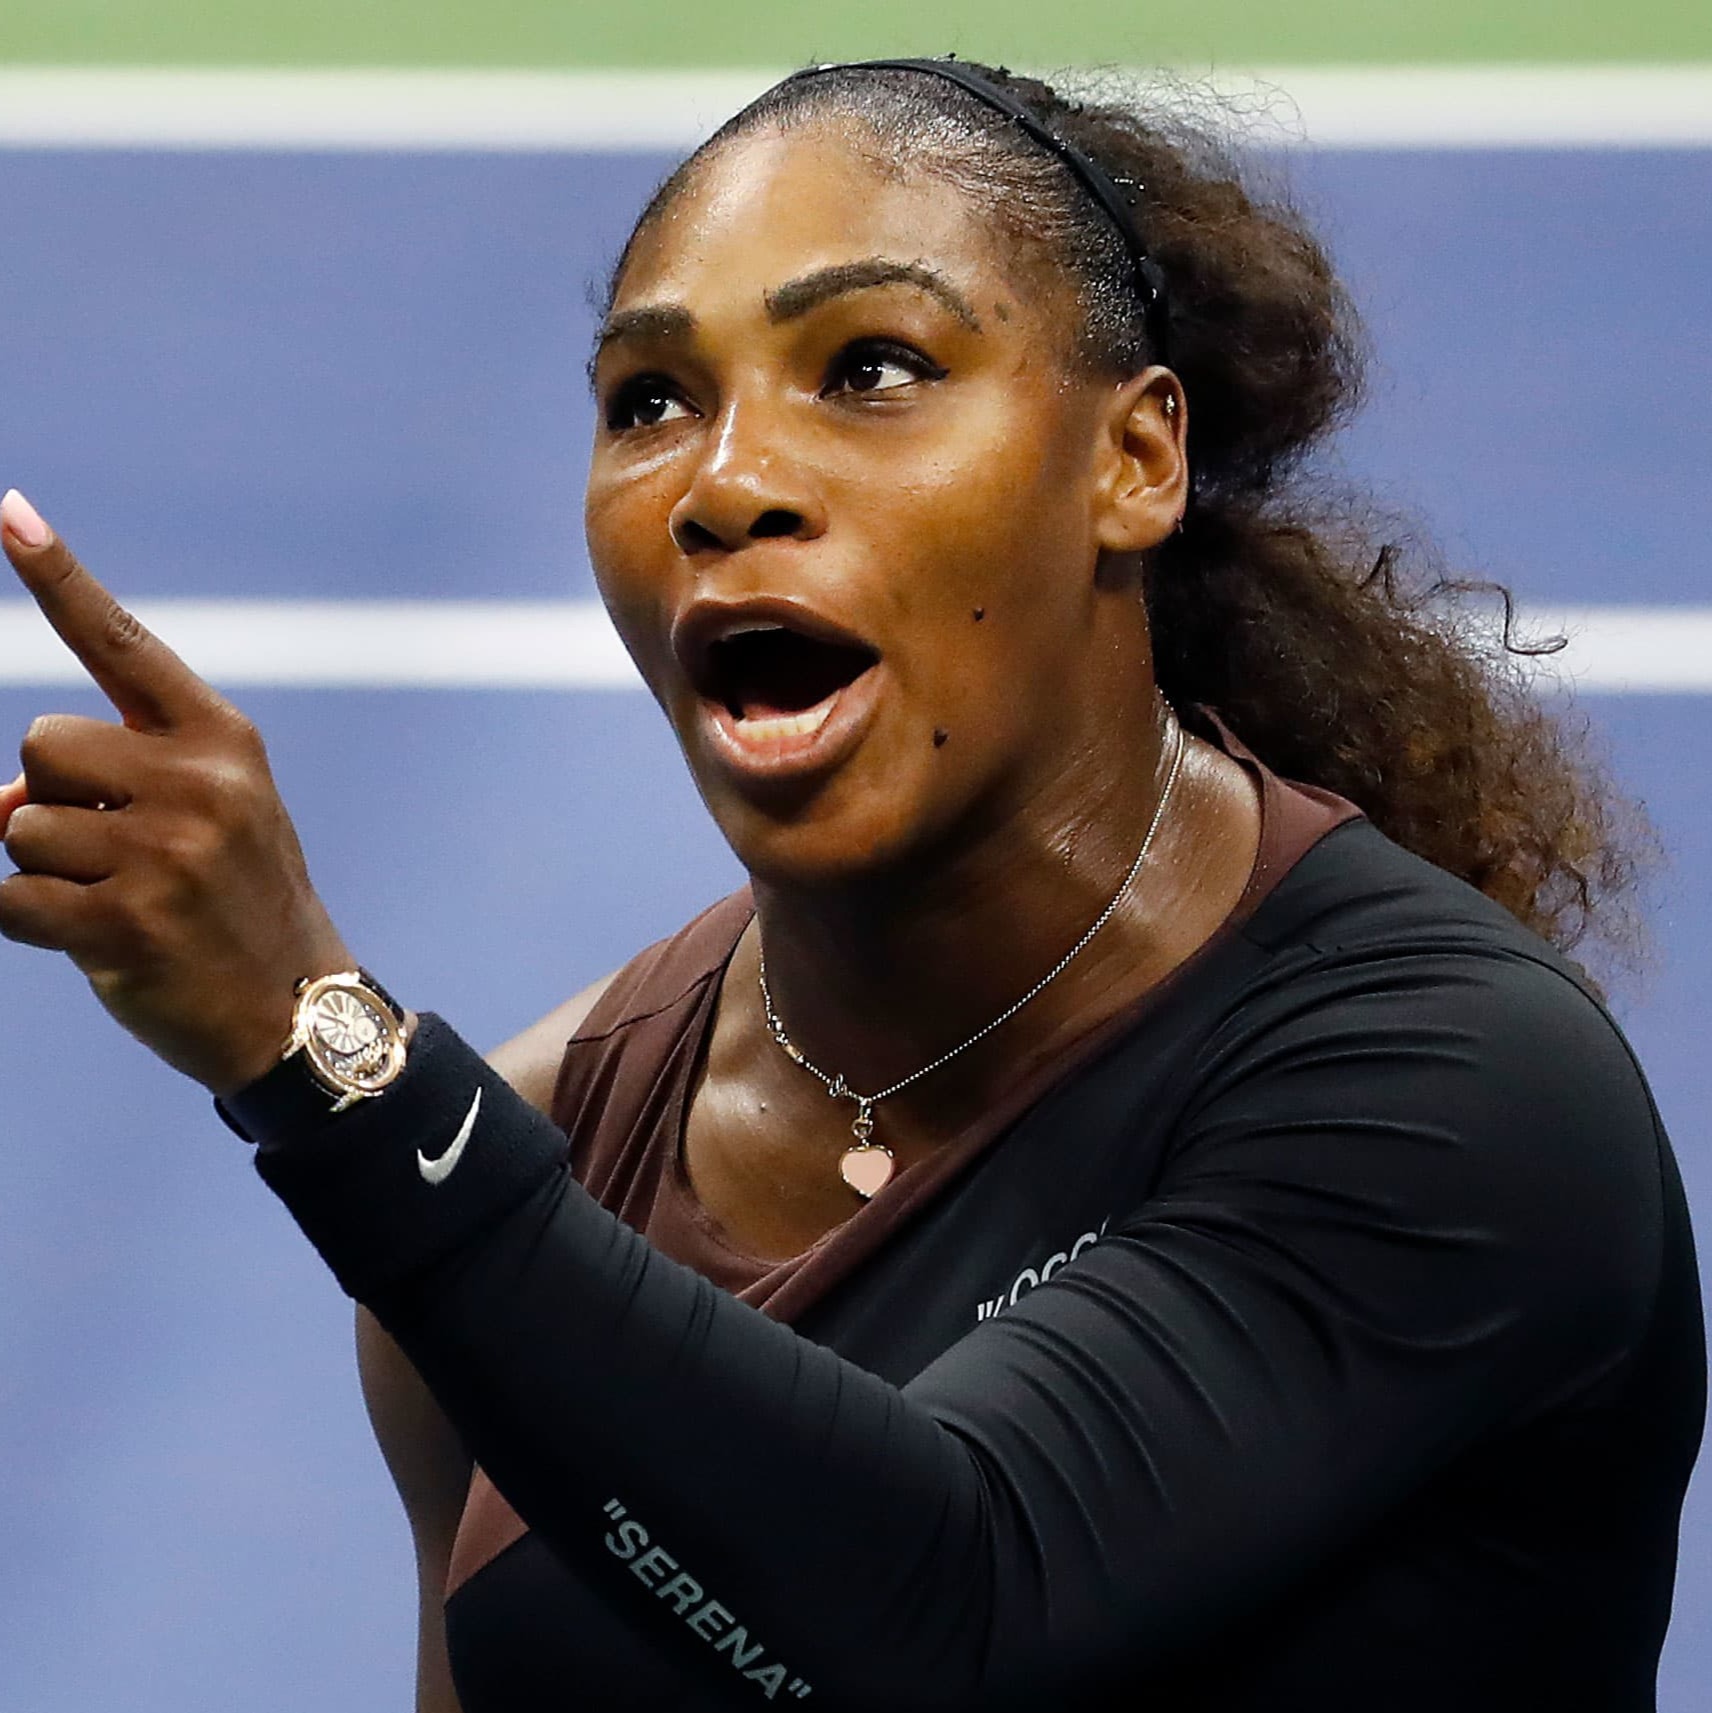 'Cheated And Robbed' – Serena Williams Once Revealed Immense 